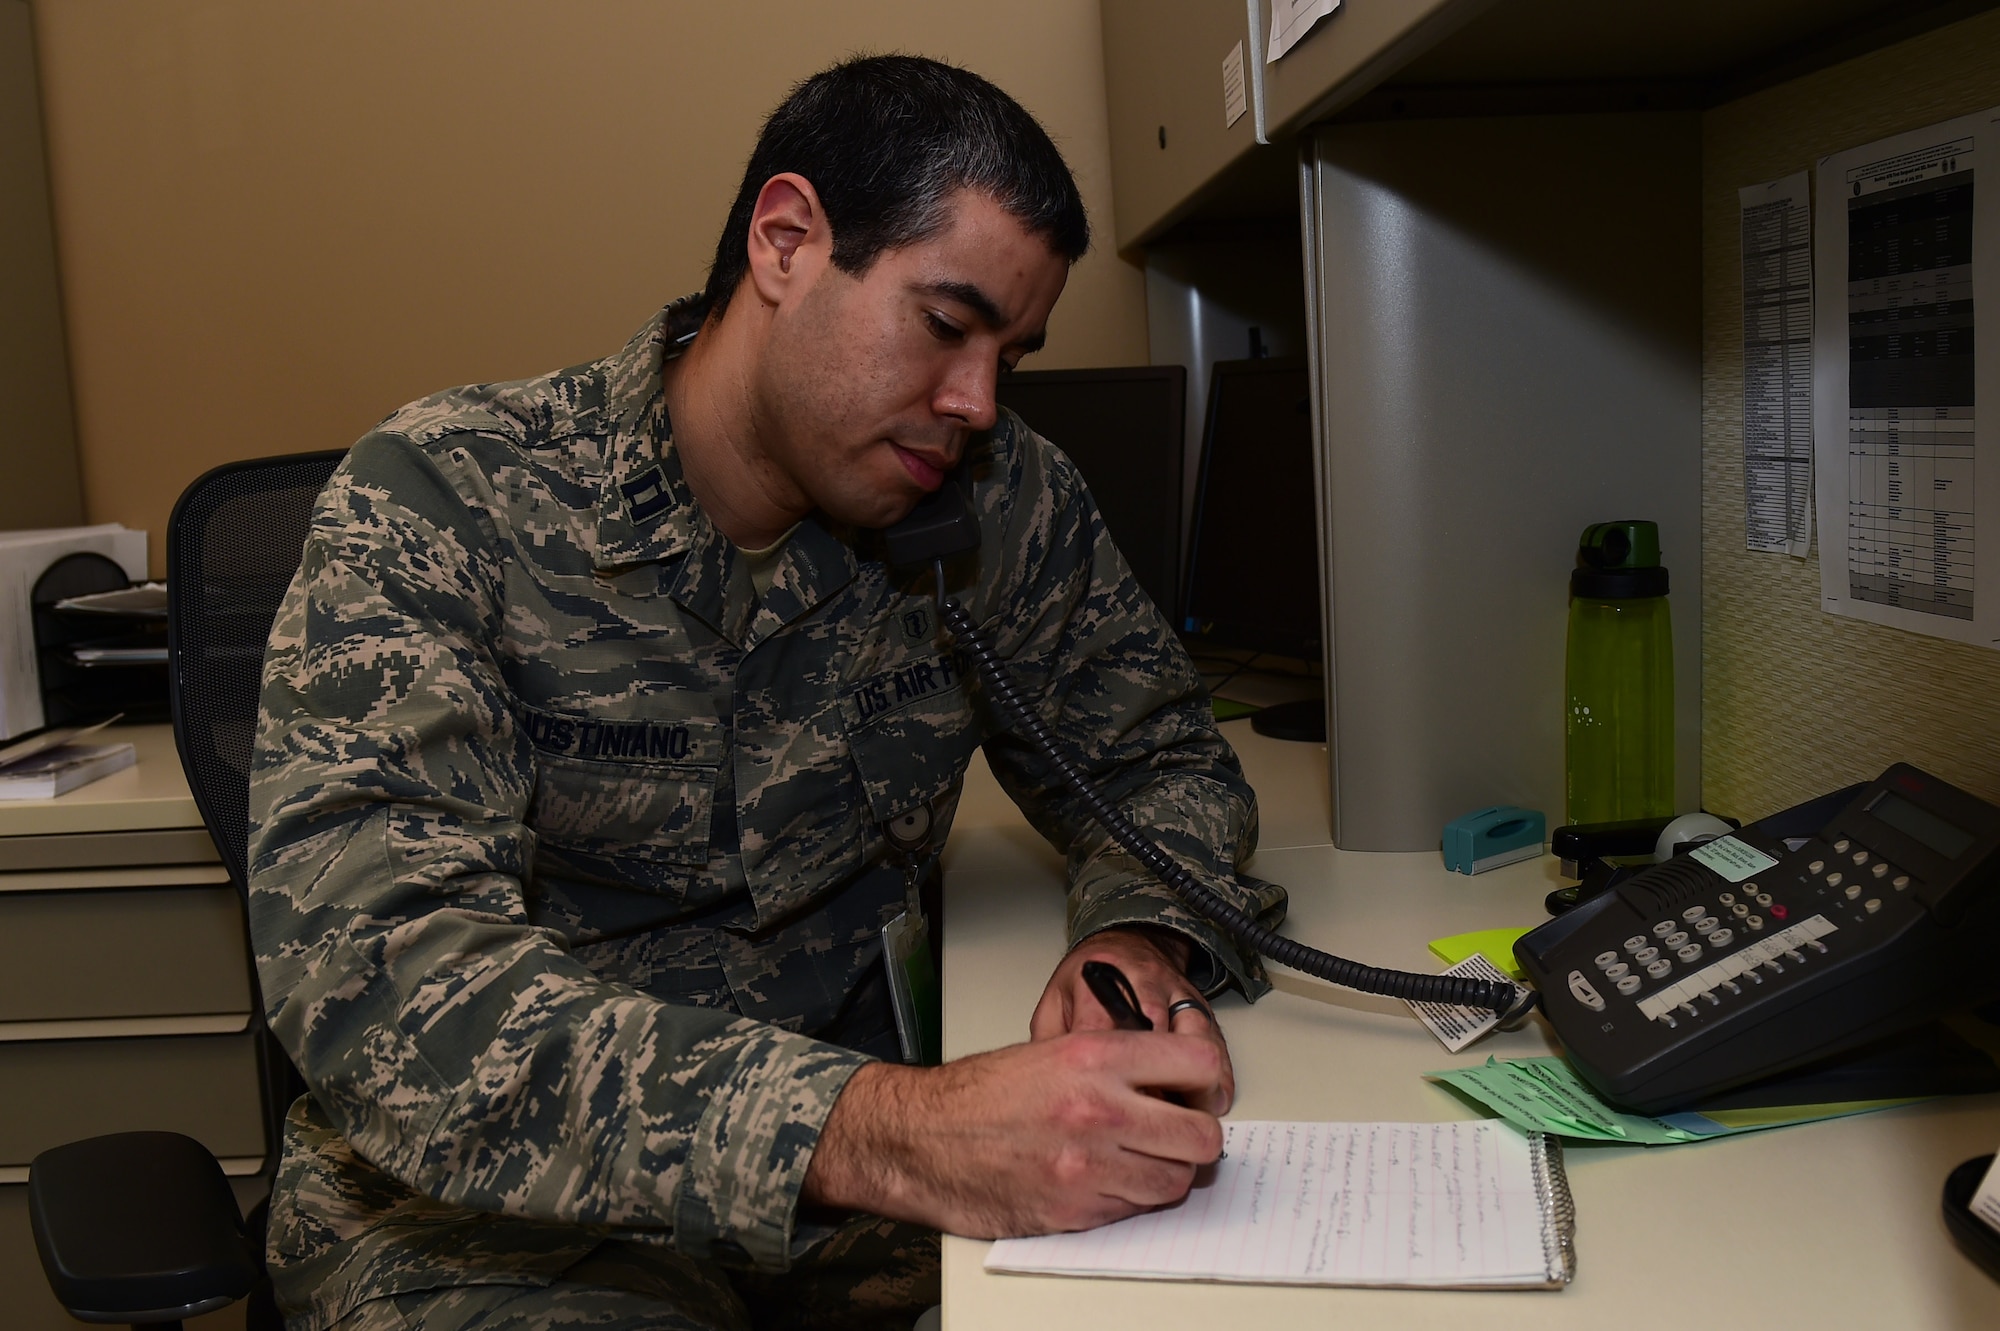 Capt. Robert Justiniano, 460th Medical Group Air Force Alcohol and Drug Abuse Prevention and Treatment manager, participates in a patient telephone conference, Jan. 20, 2017, at the Veterans Affairs Joint Venture Buckley Clinic in Aurora, Colo. The ADAPT program promotes health, readiness and wellness by prevention and treatment of substance abuse. (U.S. Air Force photo by Airman 1st Class Gabrielle Spradling/Released)